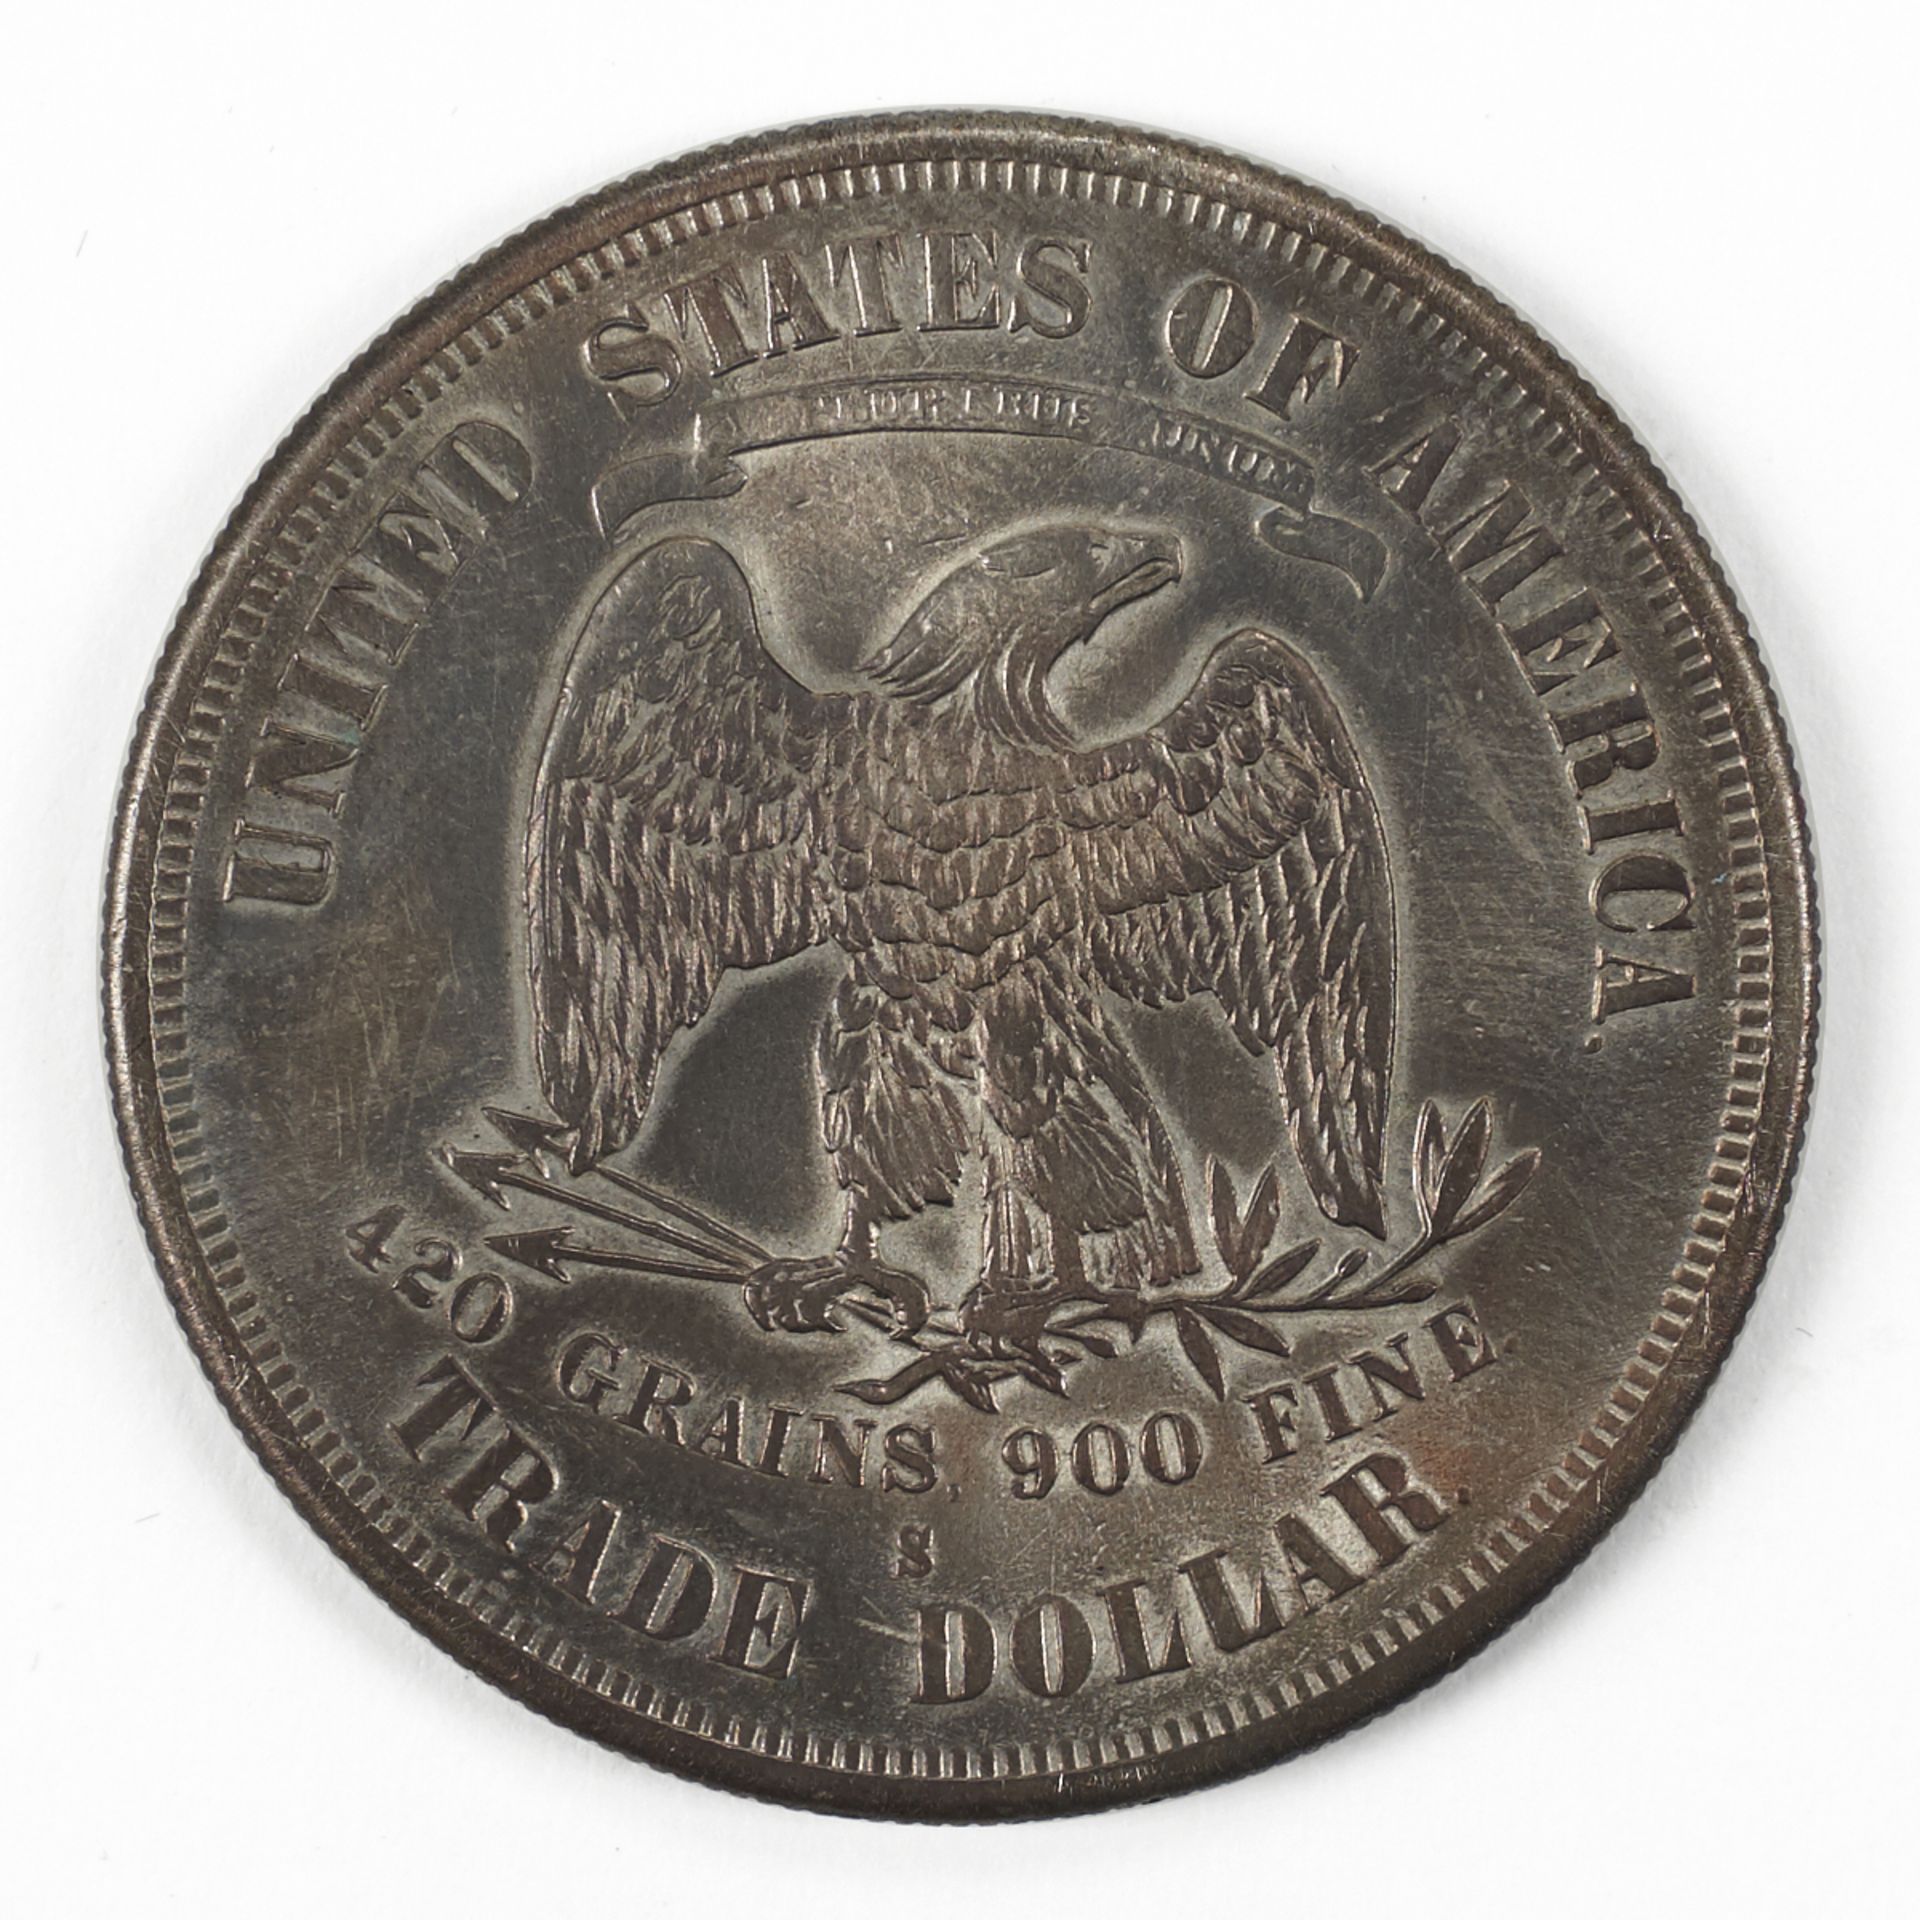 1874 S Trade Dollar Coin - Image 2 of 2